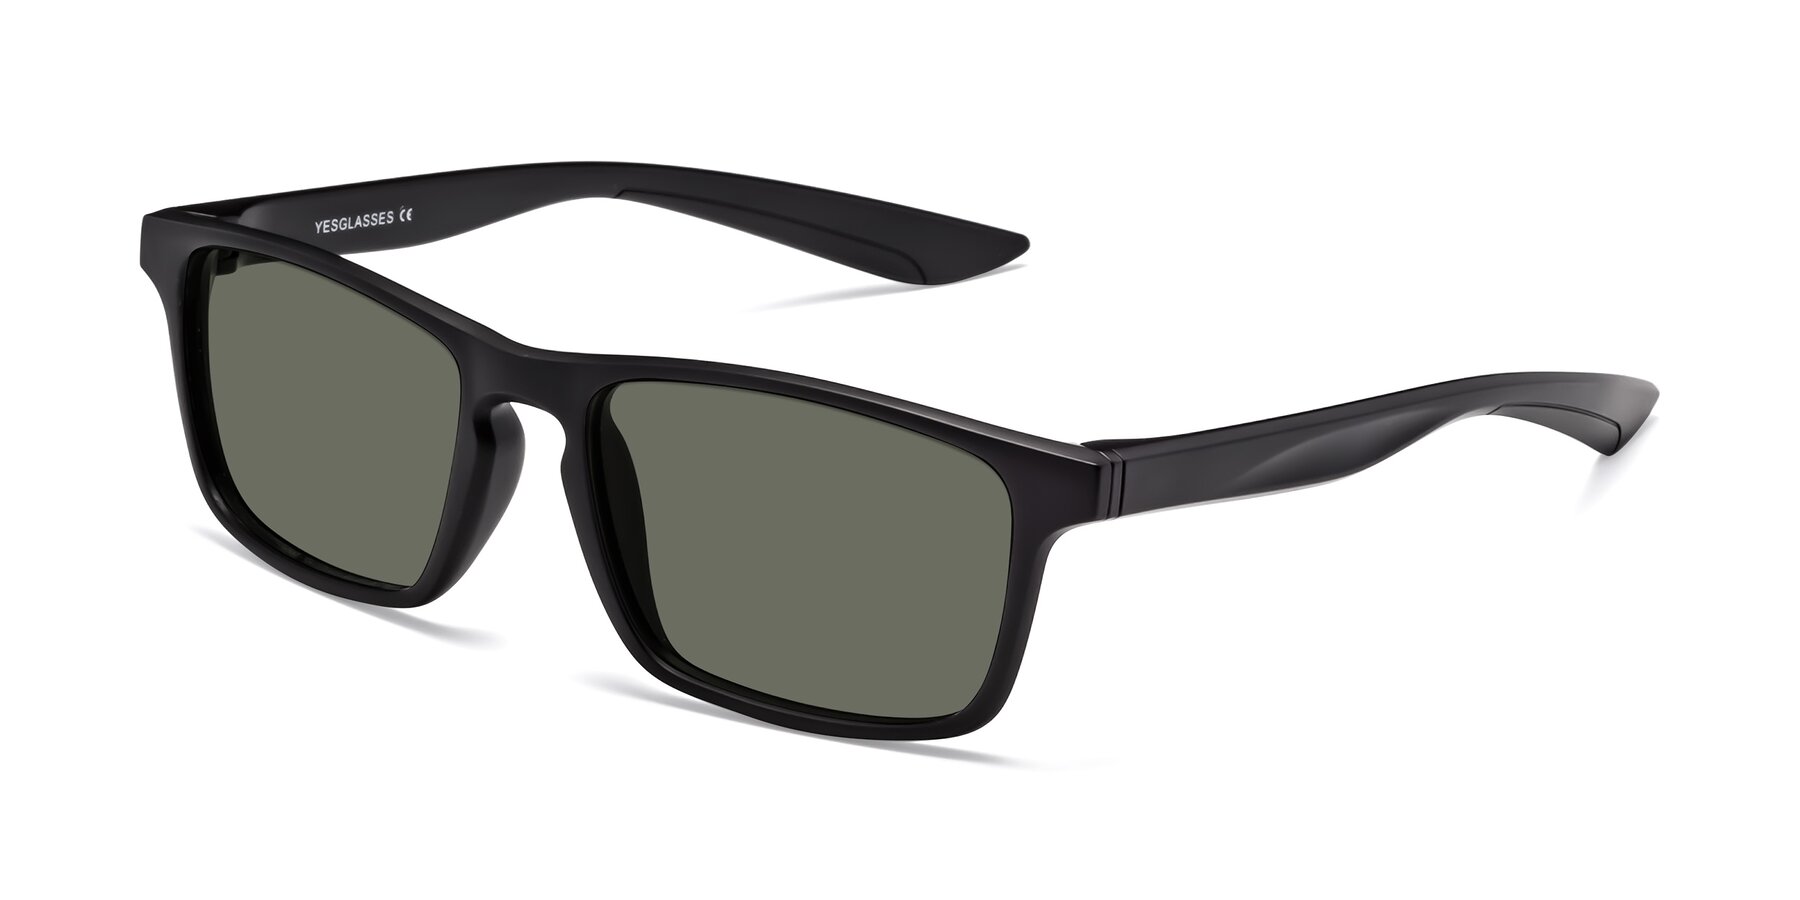 Angle of Passion in Matte Black with Gray Polarized Lenses